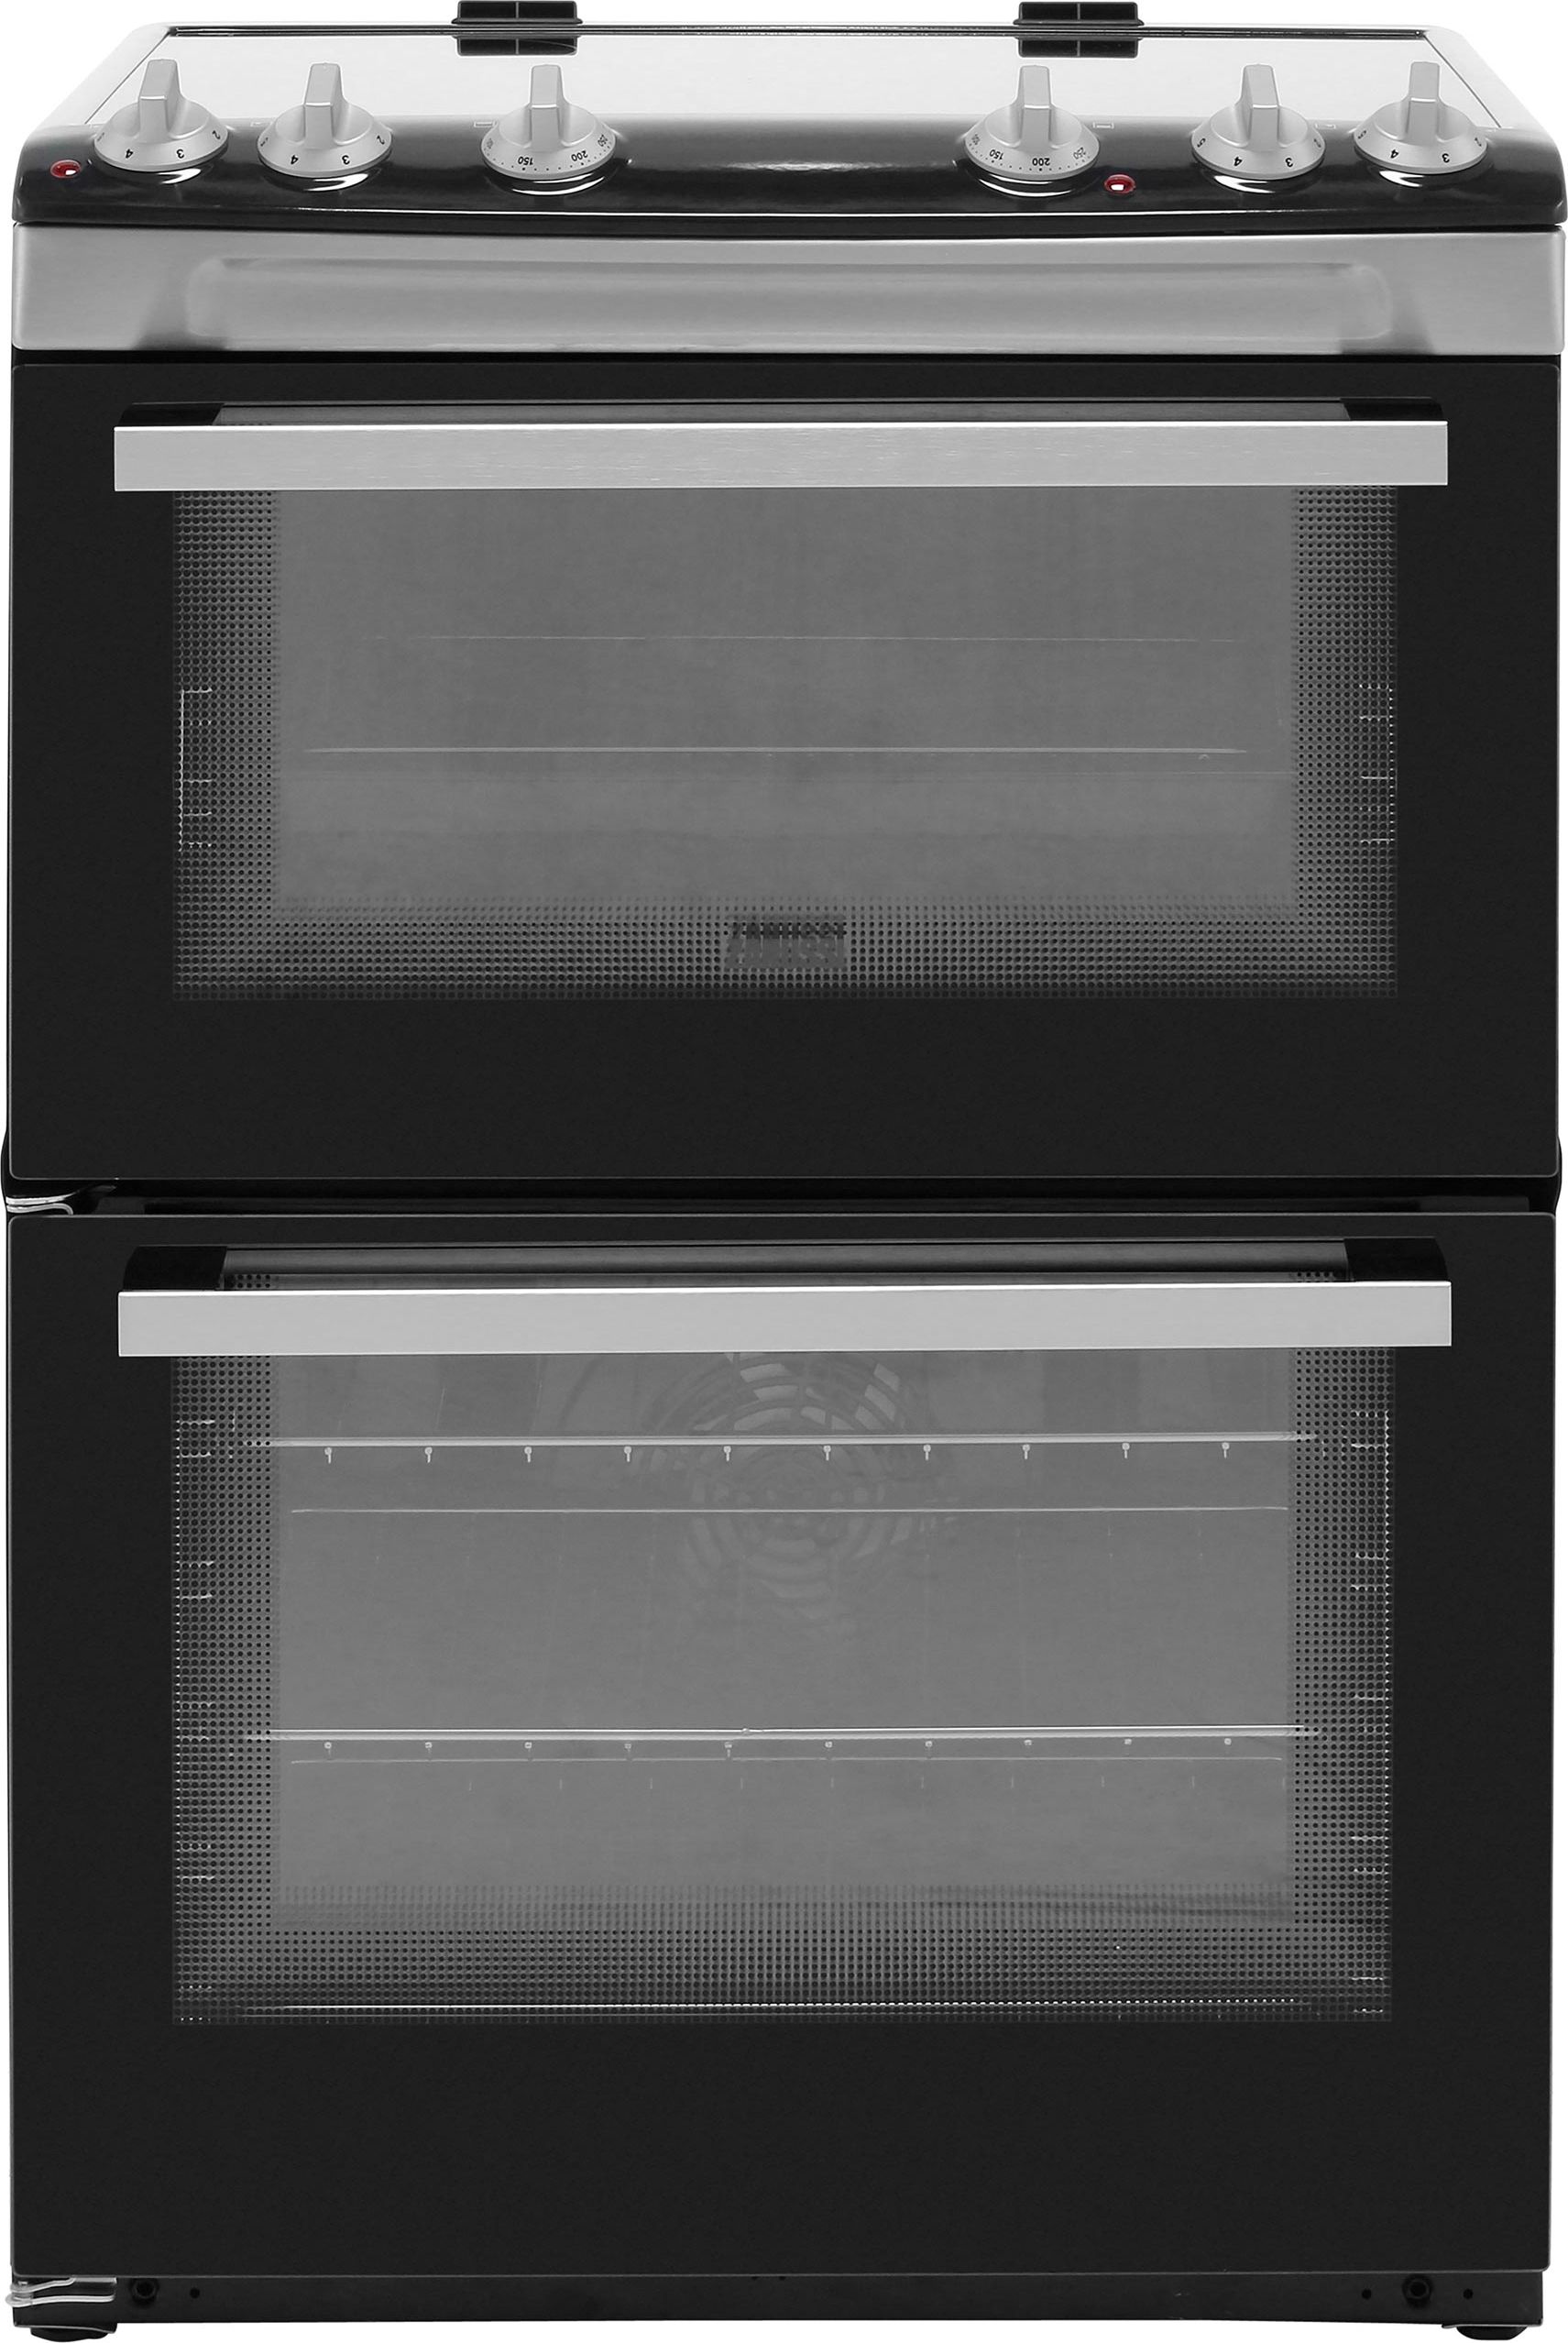 Zanussi ZCV66050XA 60cm Electric Cooker with Ceramic Hob - Stainless Steel - A/A Rated, Stainless Steel